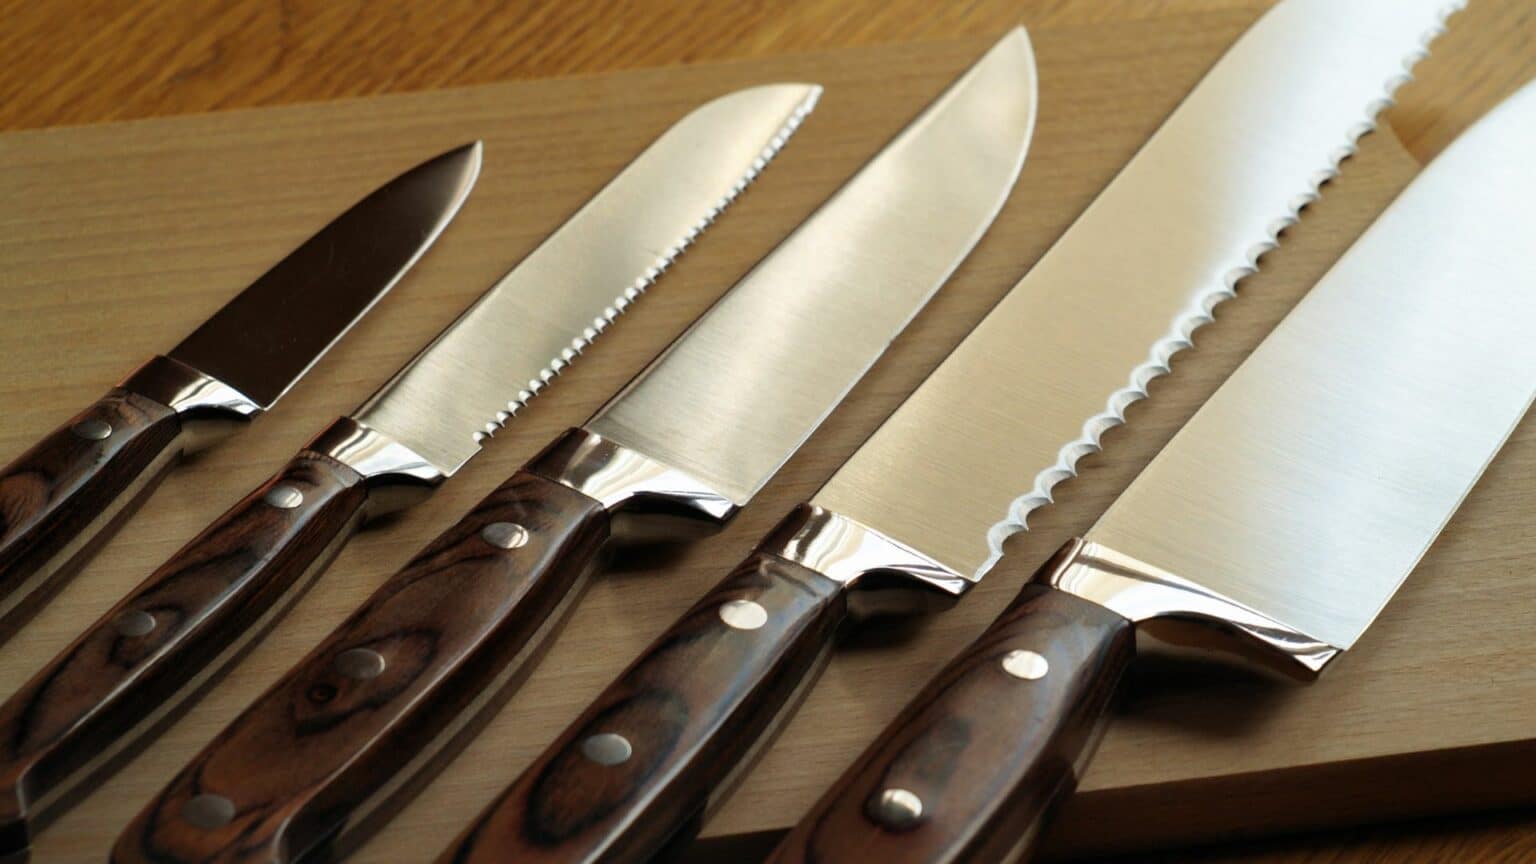 Understanding the Fundamentals of Knife Care